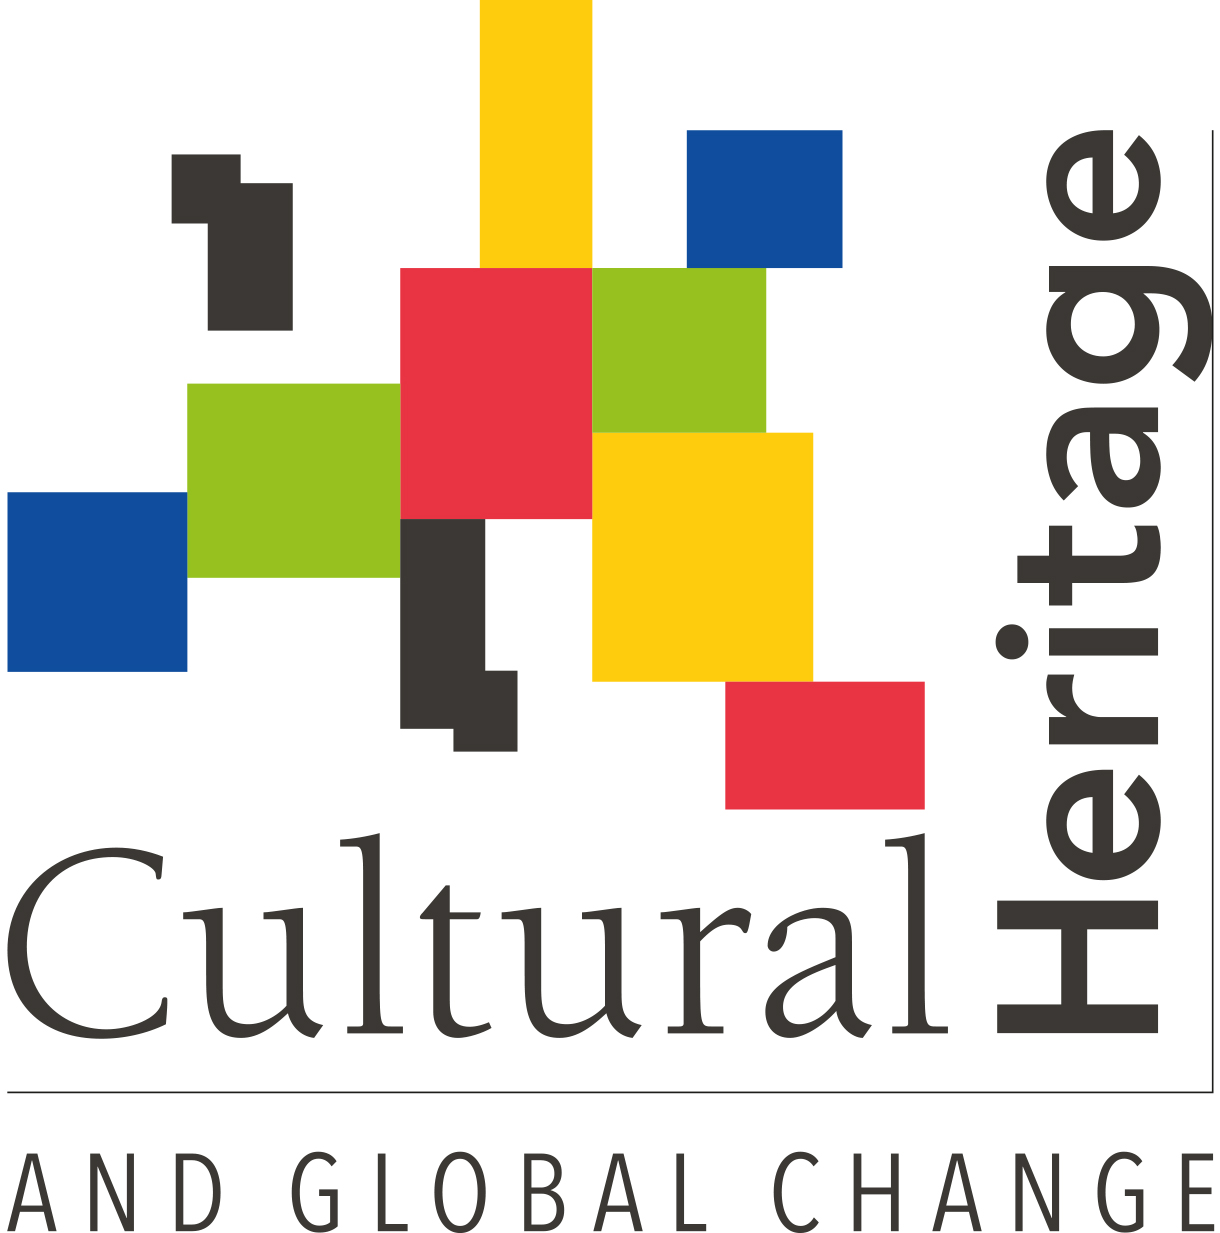 Cultural Heritage, Identities & Perspectives: Responding to Changing